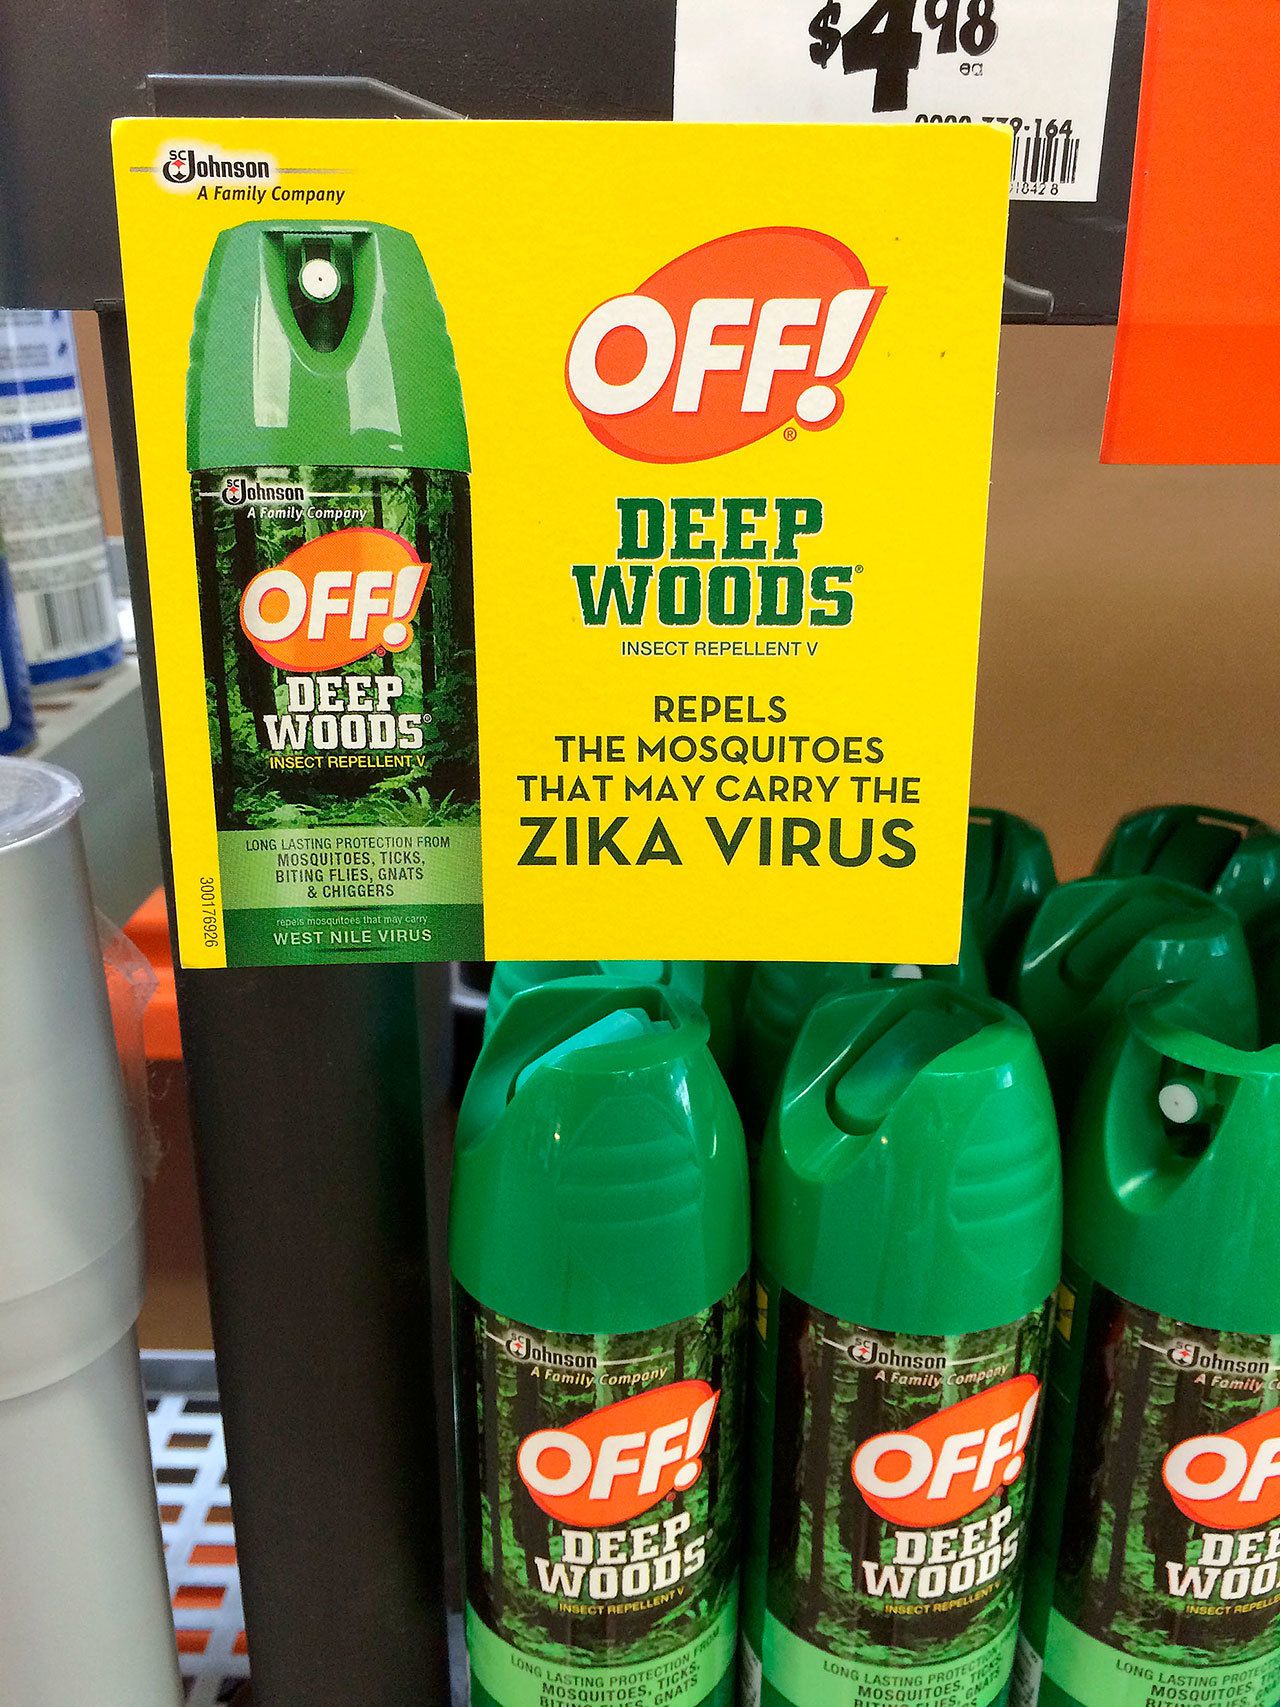 Cans of Off! insect repellent are displayed with a sign which reads, “Repels the mosquitos that may carry the Zika virus” at a home improvement store in Fairless Hills, Pennsylvania. (AP Photo/Linda A. Johnson)